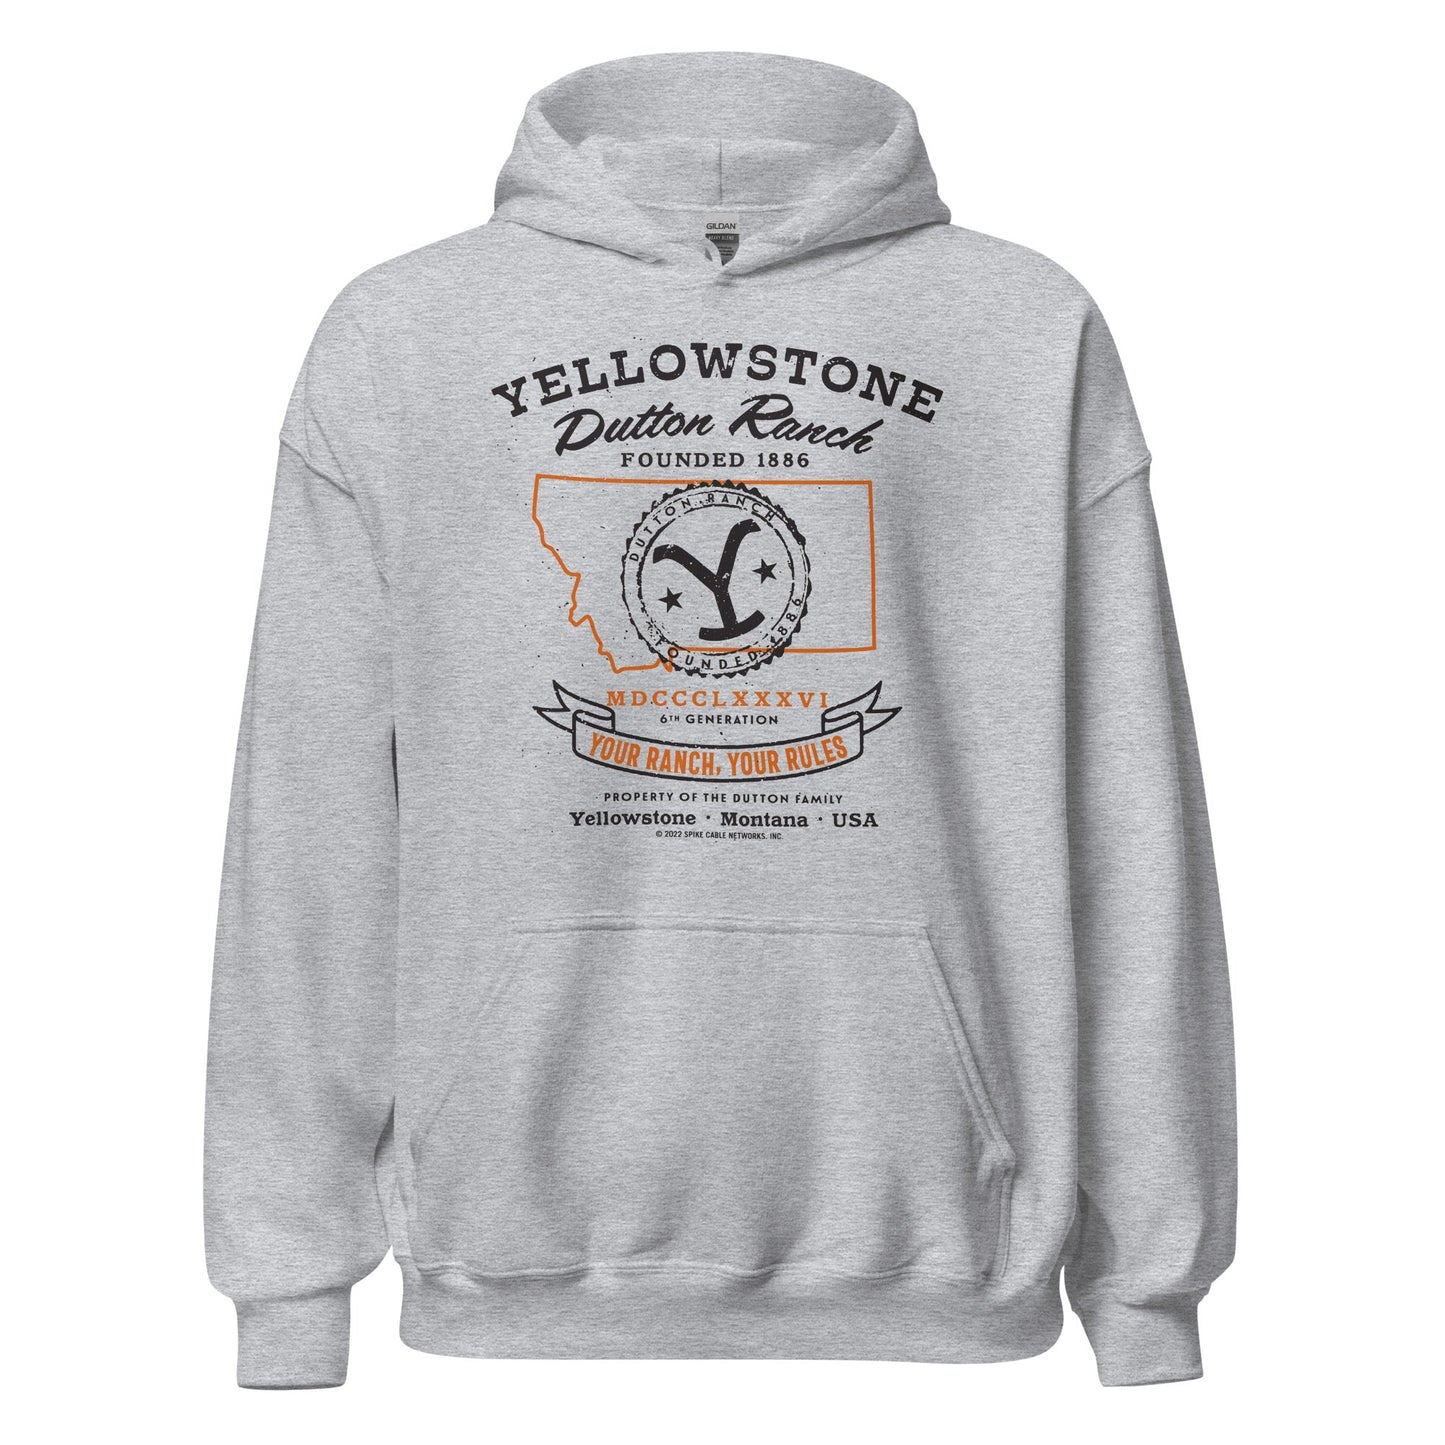 Yellowstone Dutton Ranch Your Ranch Your Rules Hooded Sweatshirt - Paramount Shop